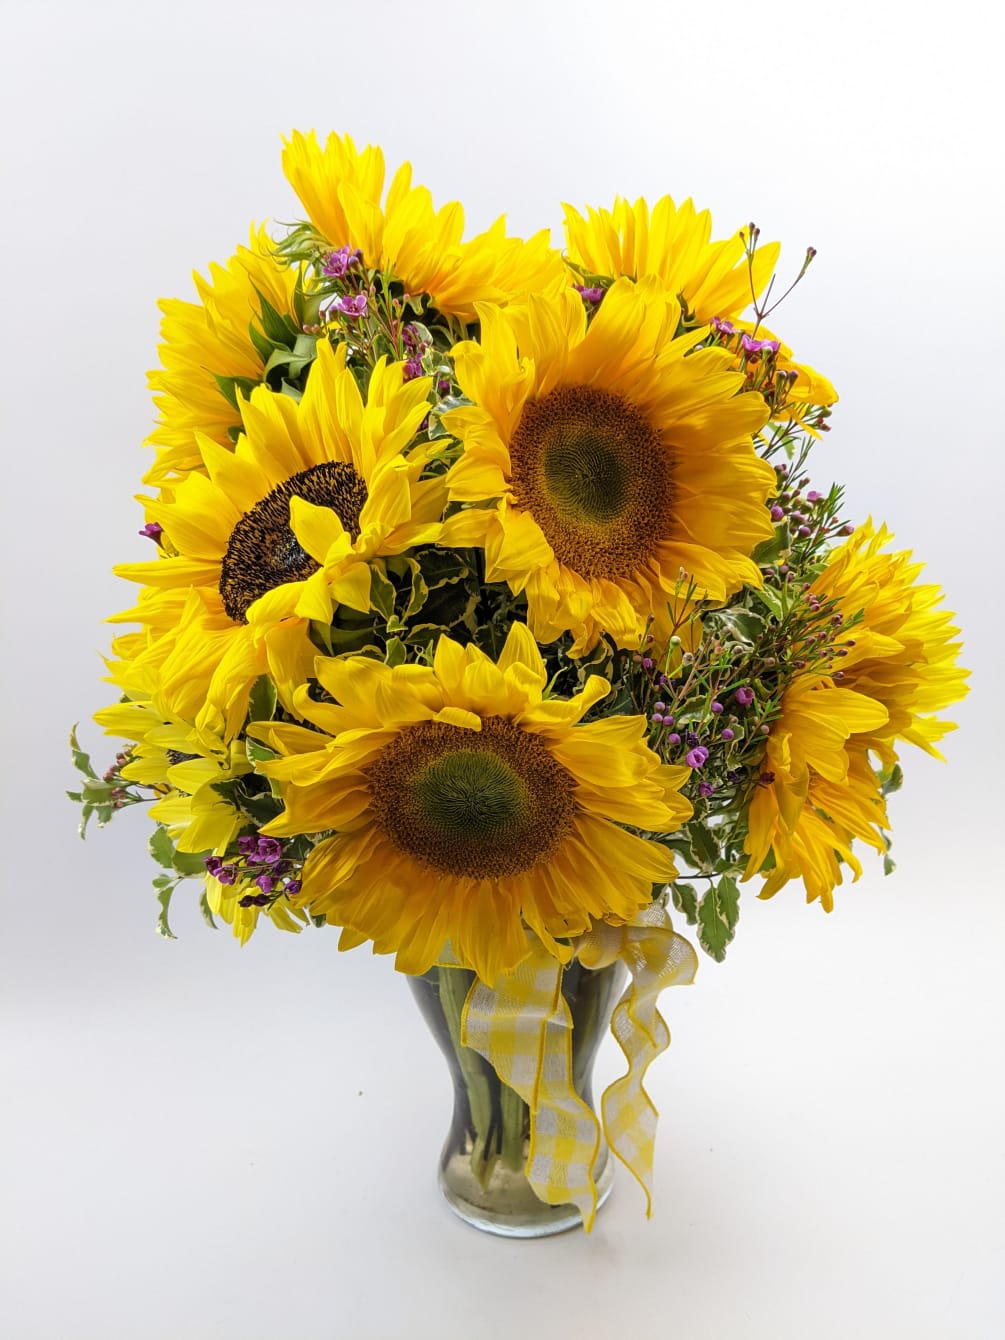 Hand-crafted mixed bouquet. The main flowers in this arrangement are sunflowers, and